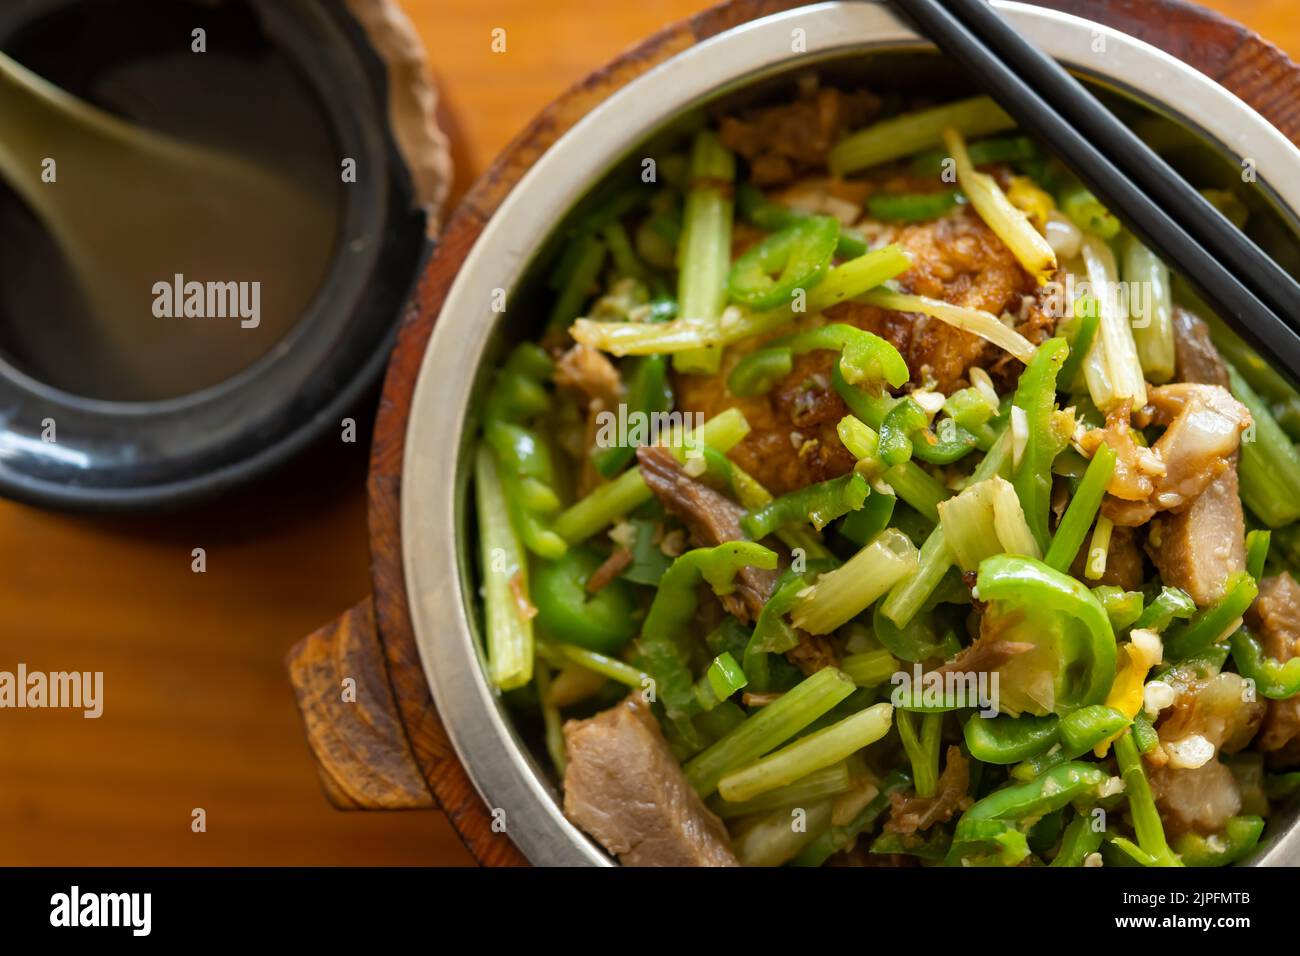 top view fast food of fried pork and fish with celery with bowl of soup horizontal composition Stock Photo